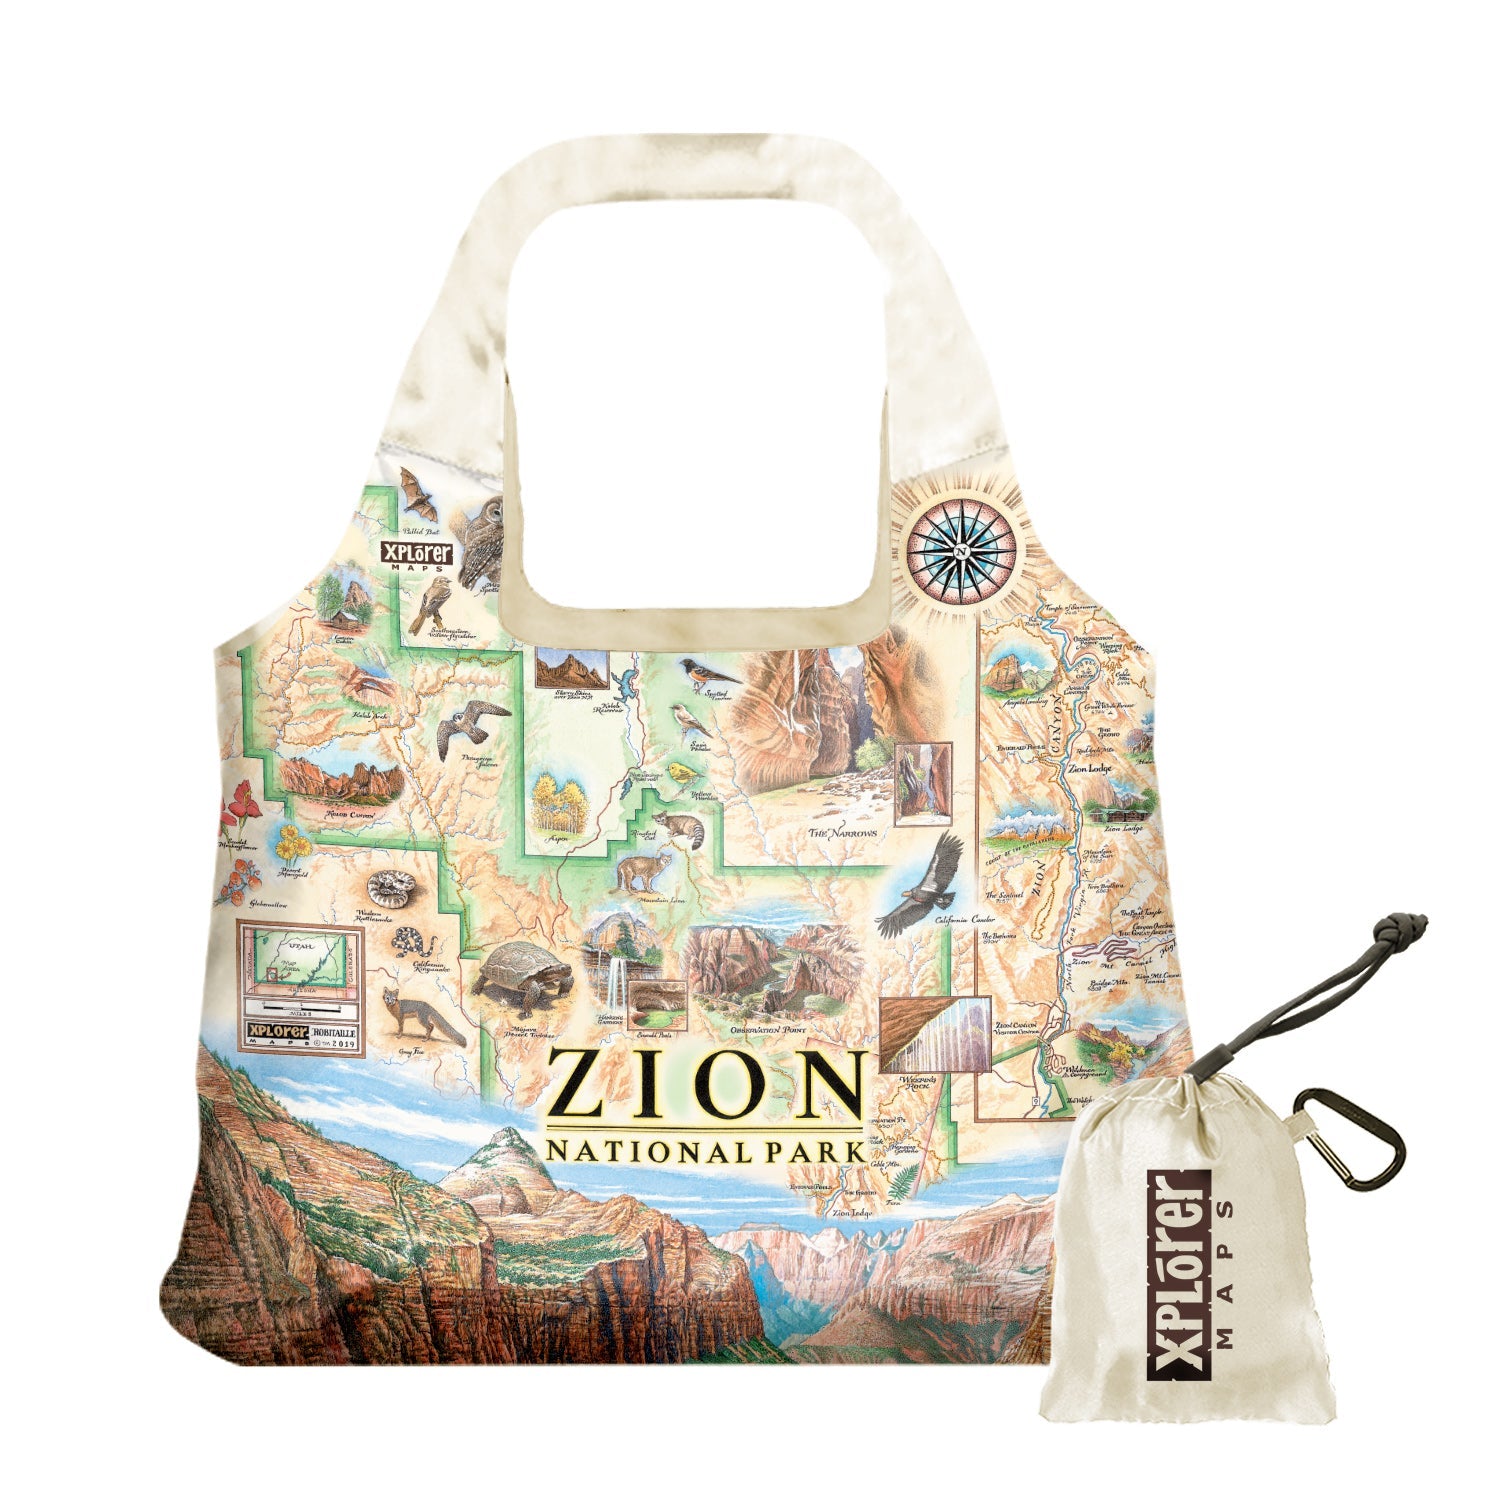 Zion National Park Map Pouch Tote Bags by Xplorer Maps. The map features illustrations of Angels Landing, Weeping Rock, The Narrows, and Kolob Canyon. Flora and fauna include Mojave desert tortoise, western columbine, and desert marigold. 